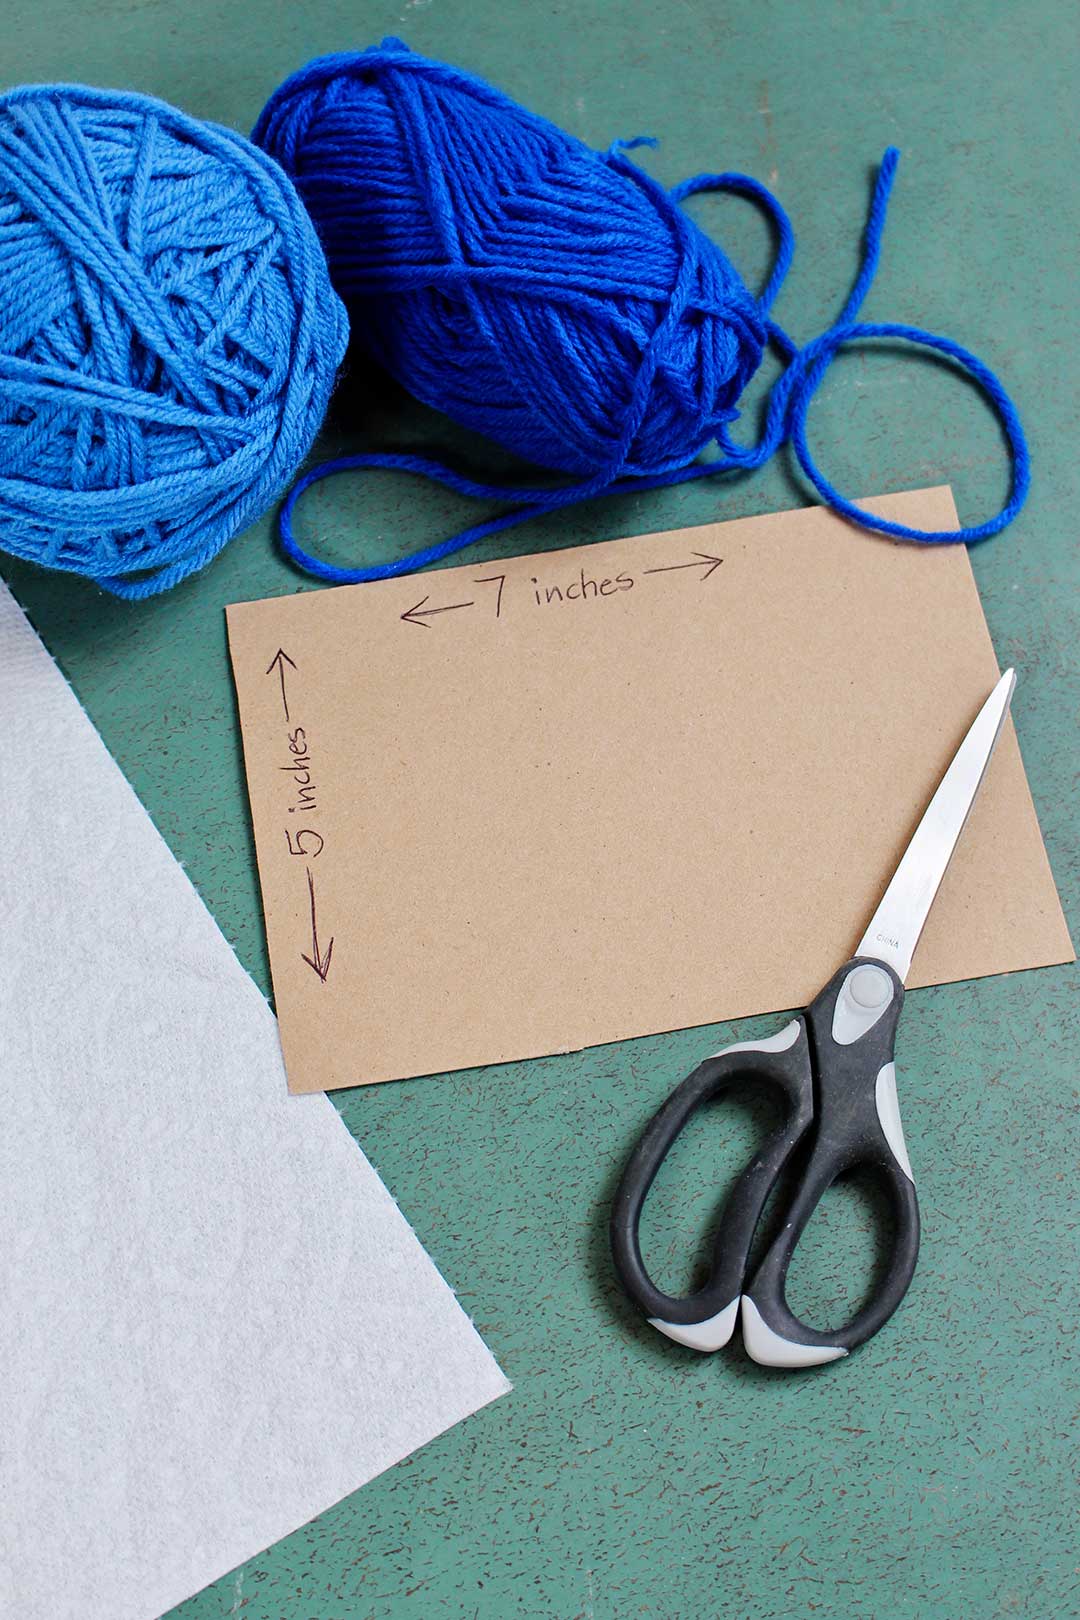 A 5x7 inch piece of cardboard surrounded by a pair of scissors, paper towel, and blue yarn.